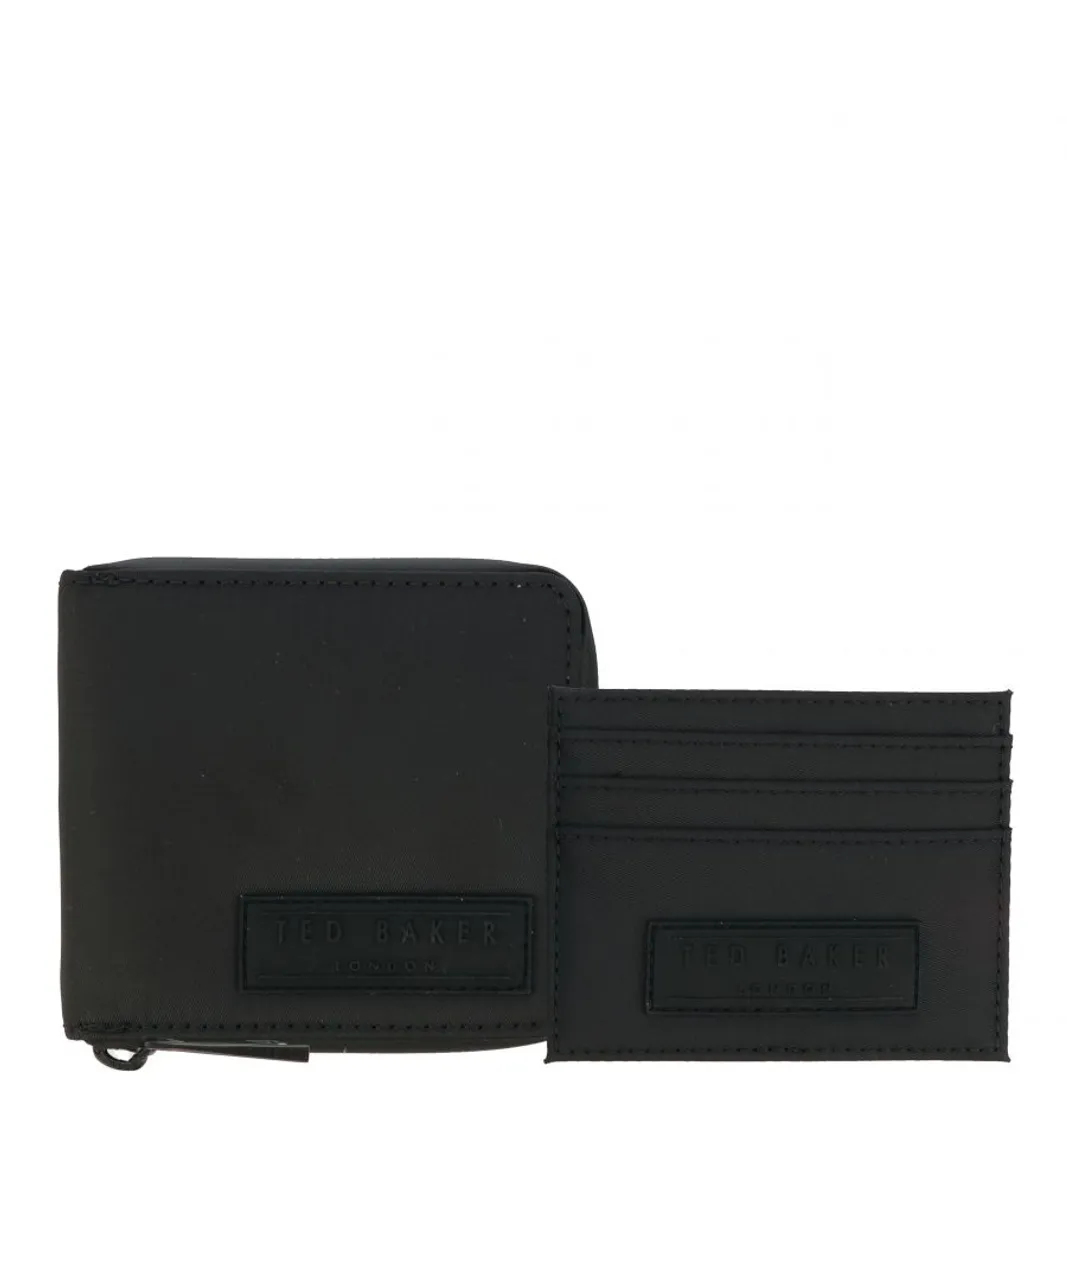 Ted Baker Mens Accessories Nealset Satin Nylon Wallet Giftset in Black - One Size